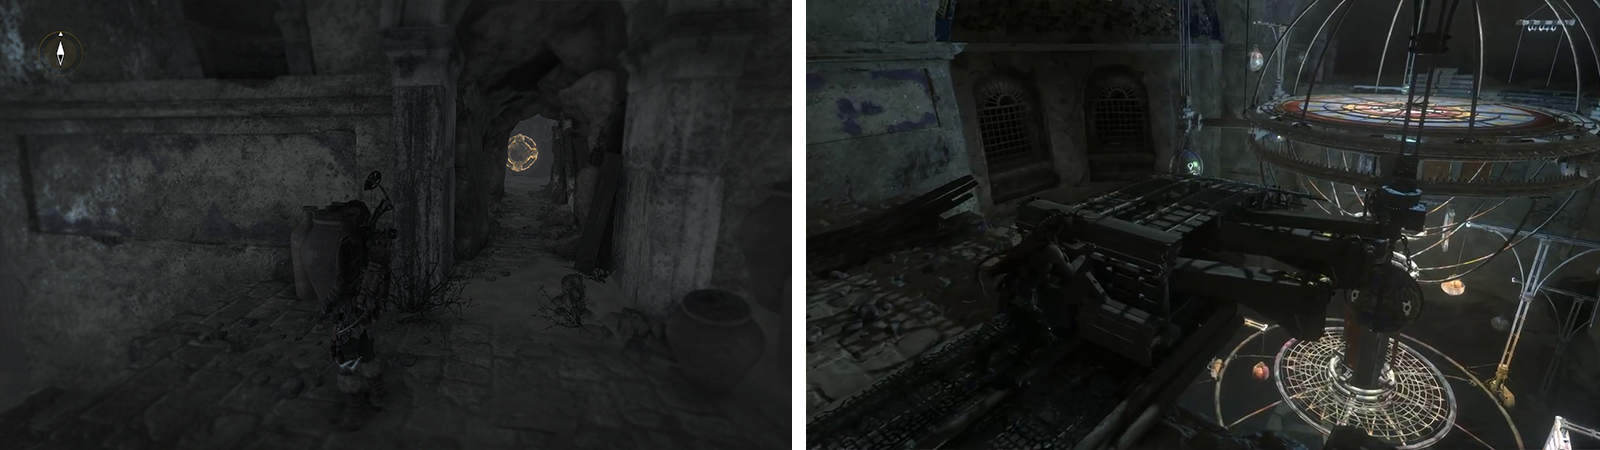 Enter the tunnel to find Mural 01 (left). Push the second lever (right) to activate the mechanism.